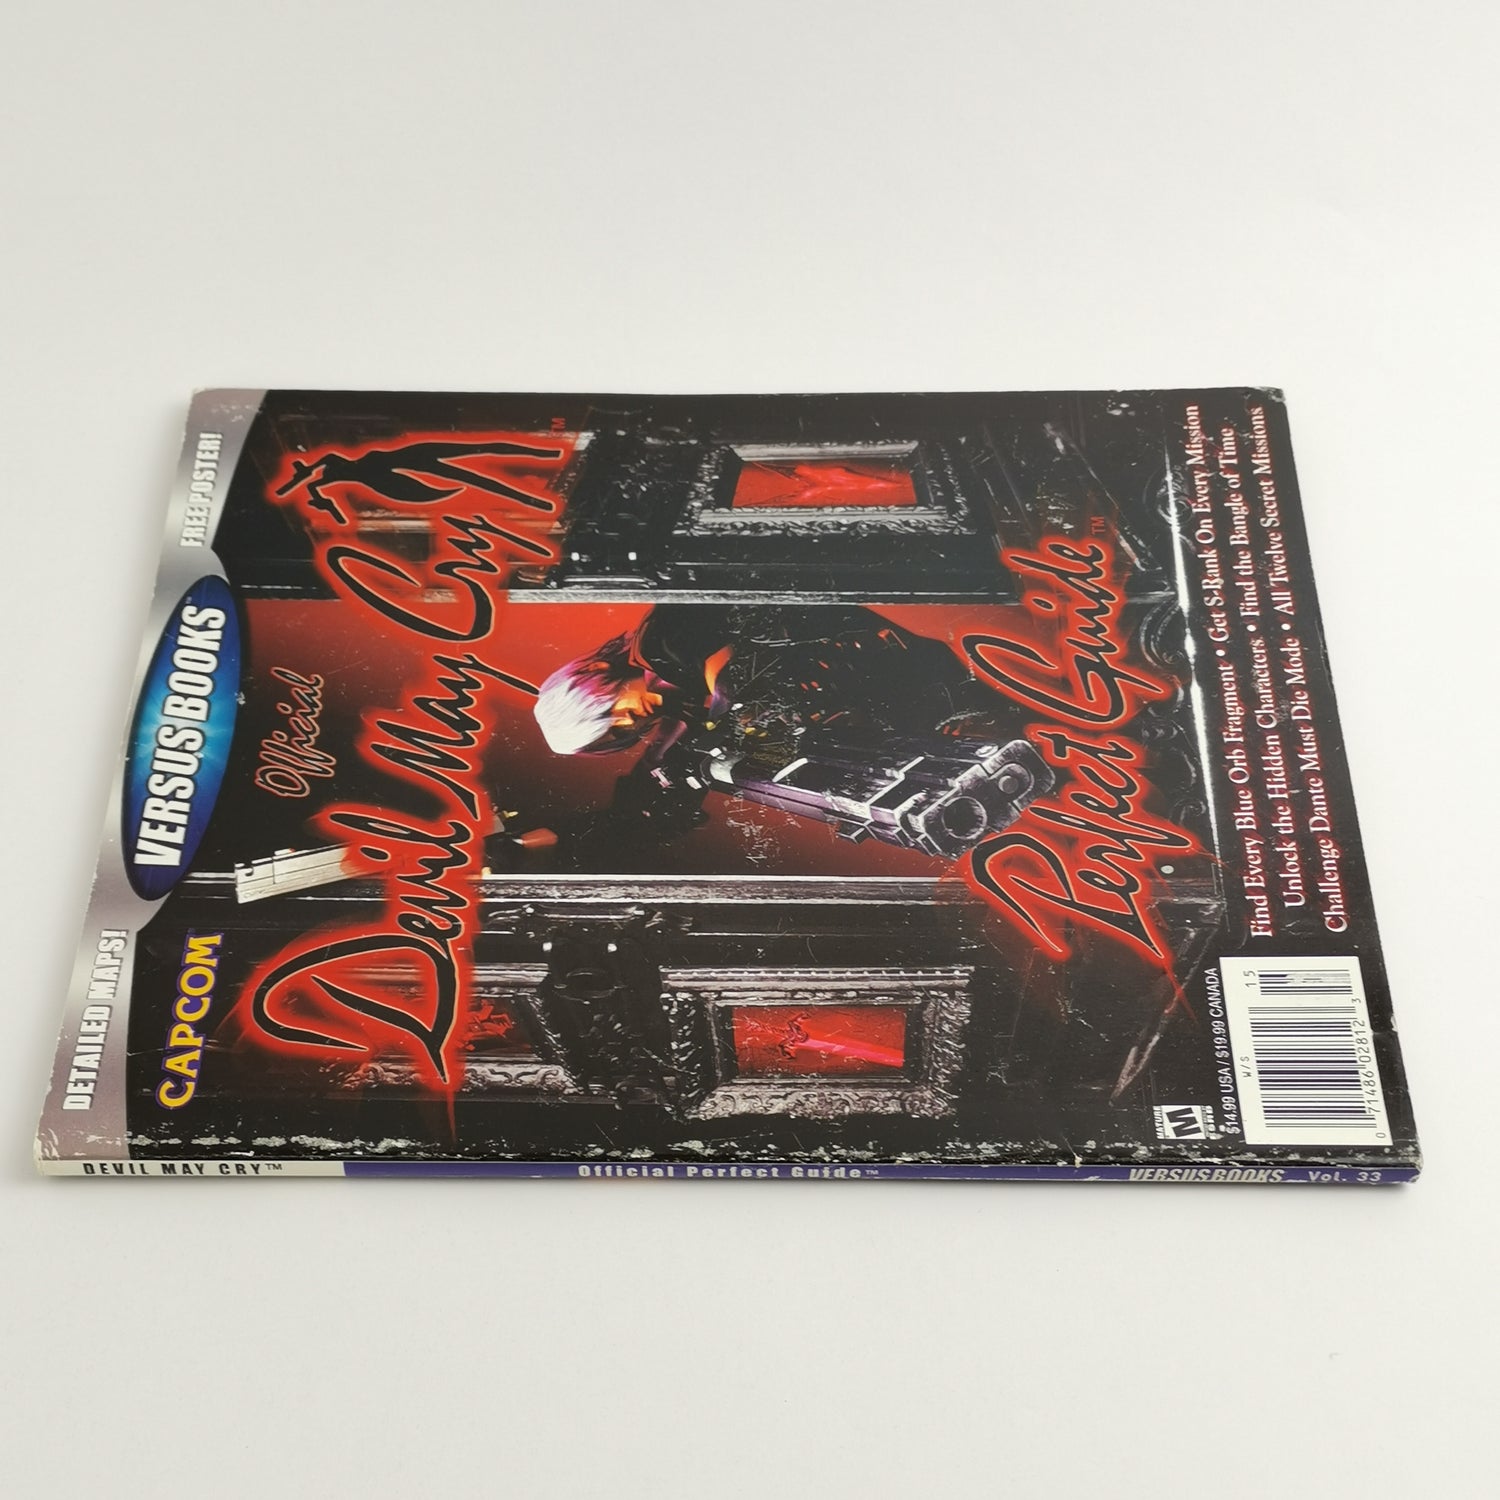 Versus Books Official Strategy Guide : Devil May Cry - Sony Playstation PS2 USA